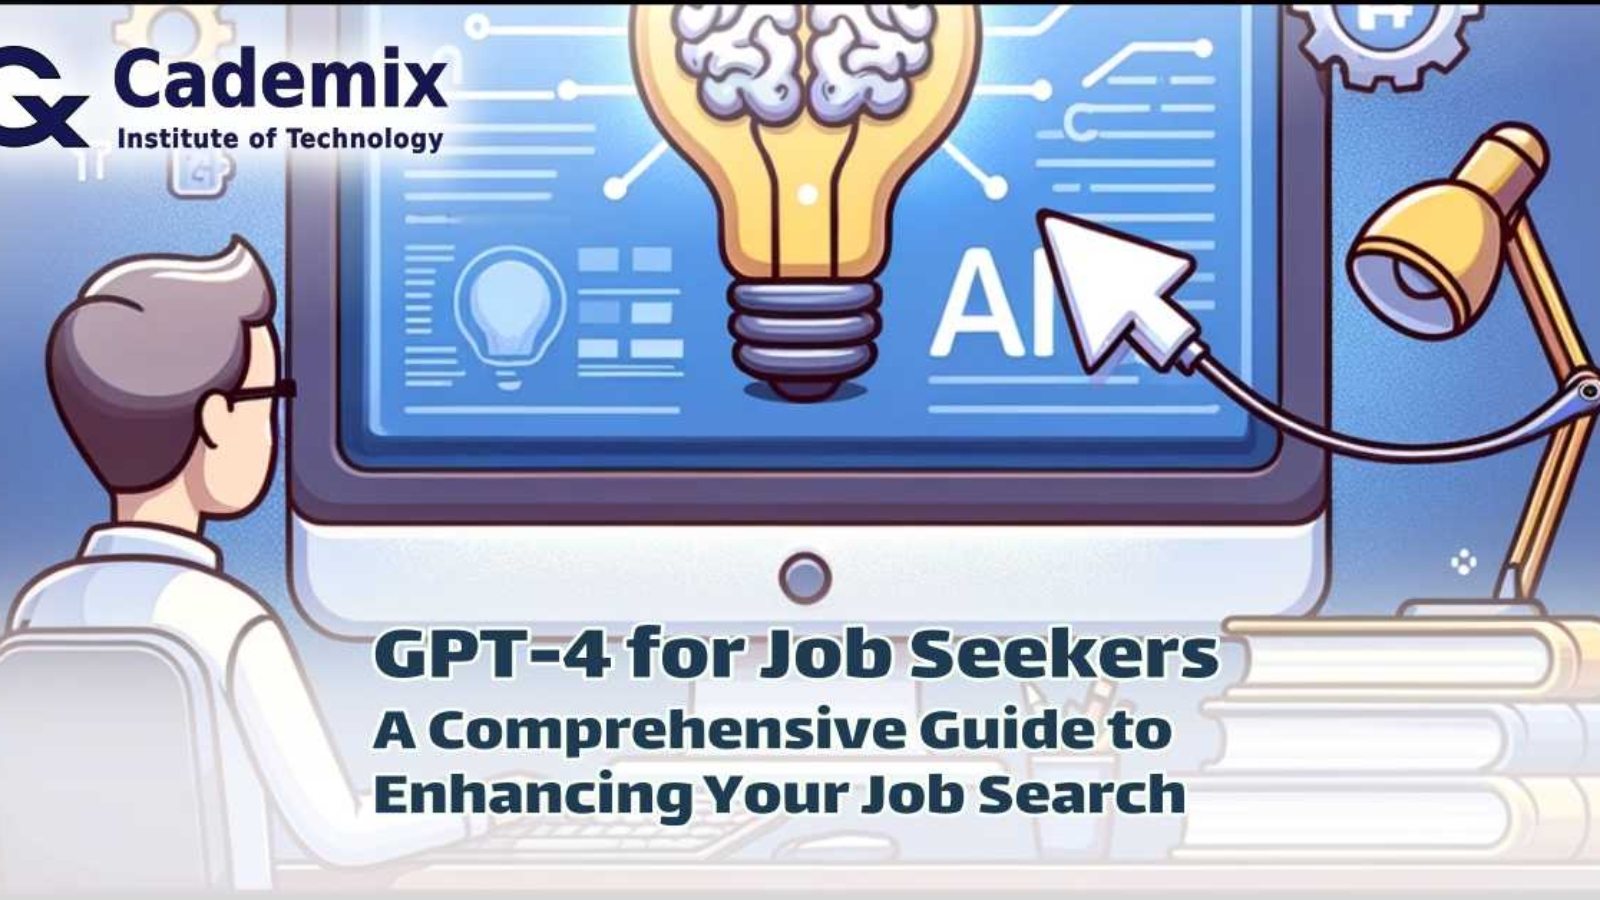 GPT-4 for Job Seekers